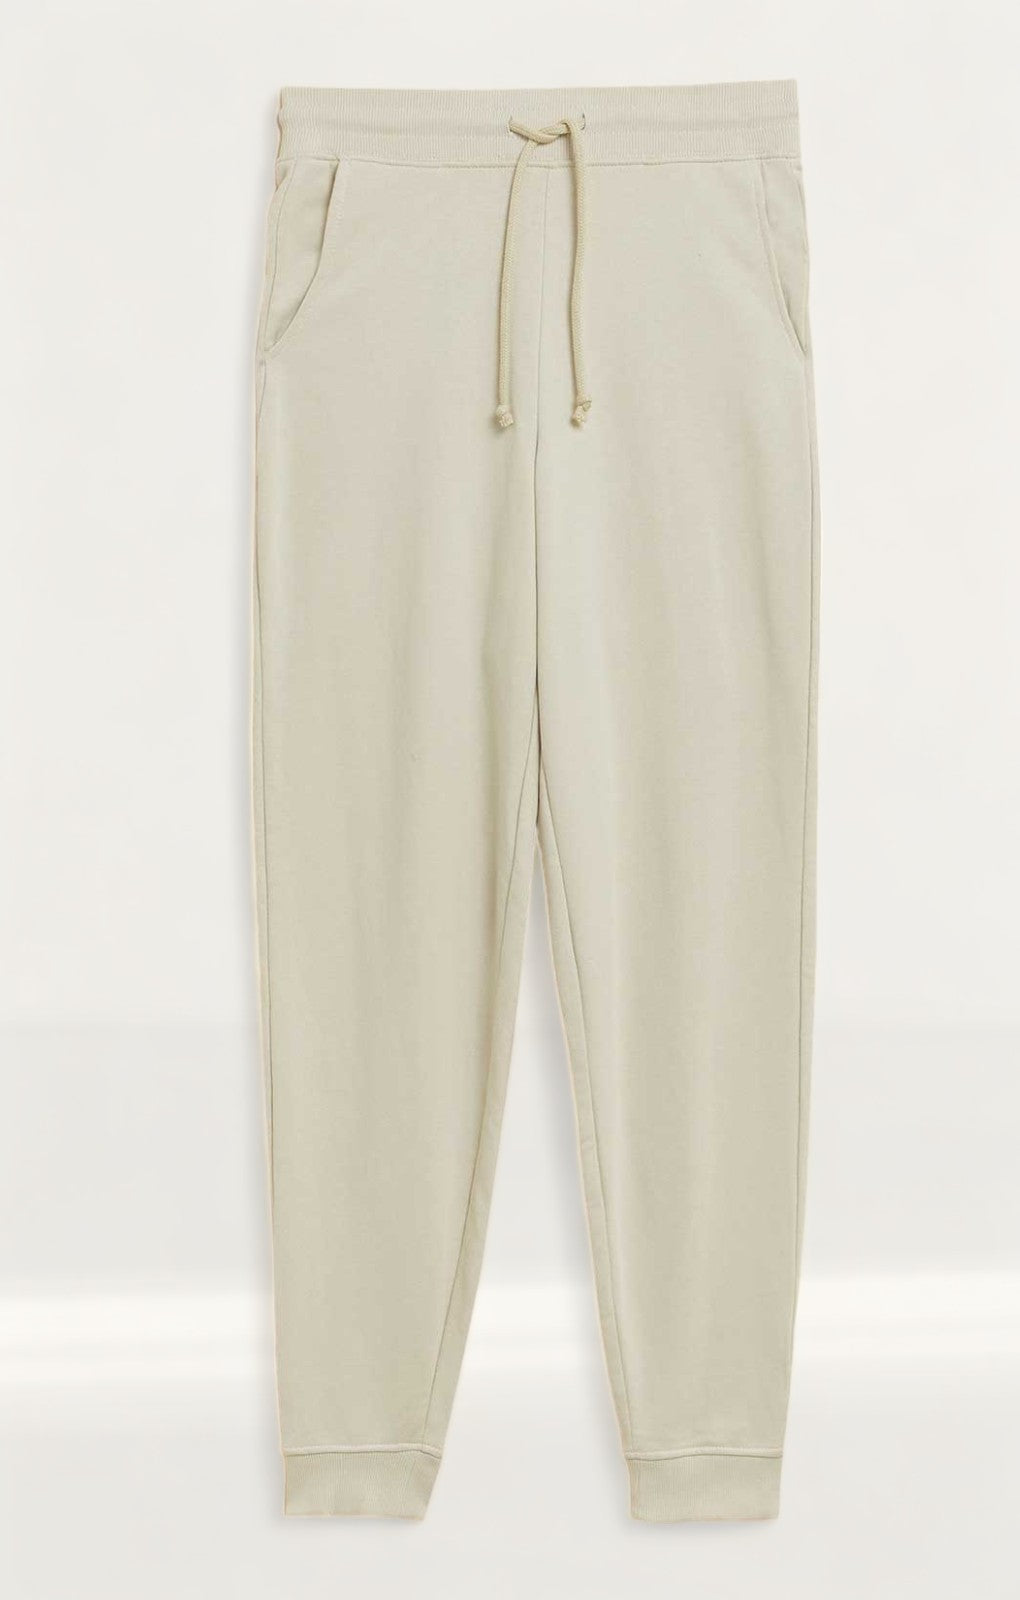 M&S Beige The Cotton Rich Cuffed Joggers product image